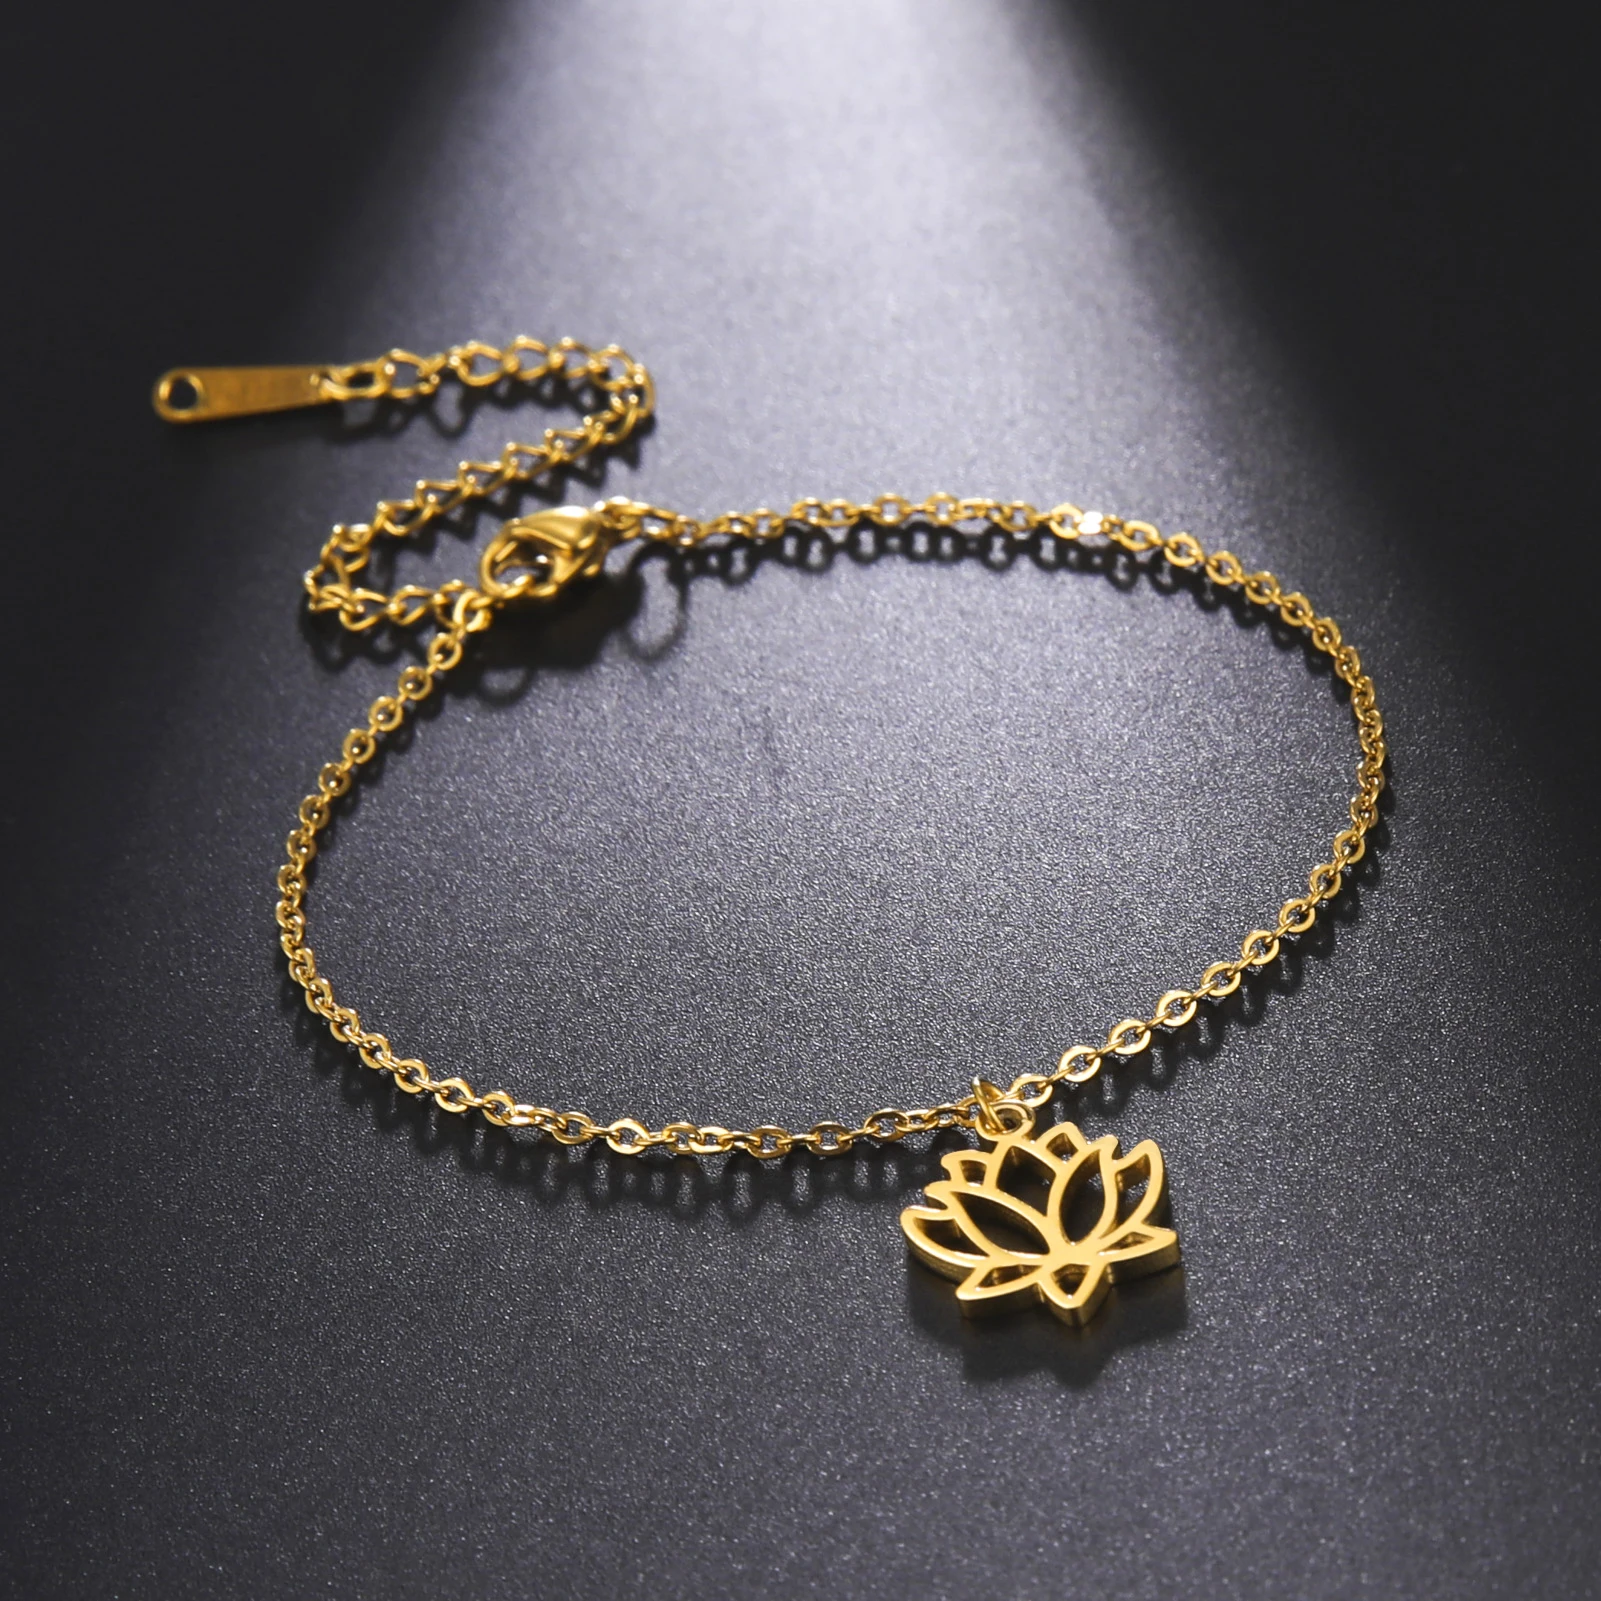 

Hollowed Lotus Flower Tiny Charm Bracelets Stainless Steel Fashion Gold Color Chain Bracelet For Women Girls Lucky Jewelry Gifts